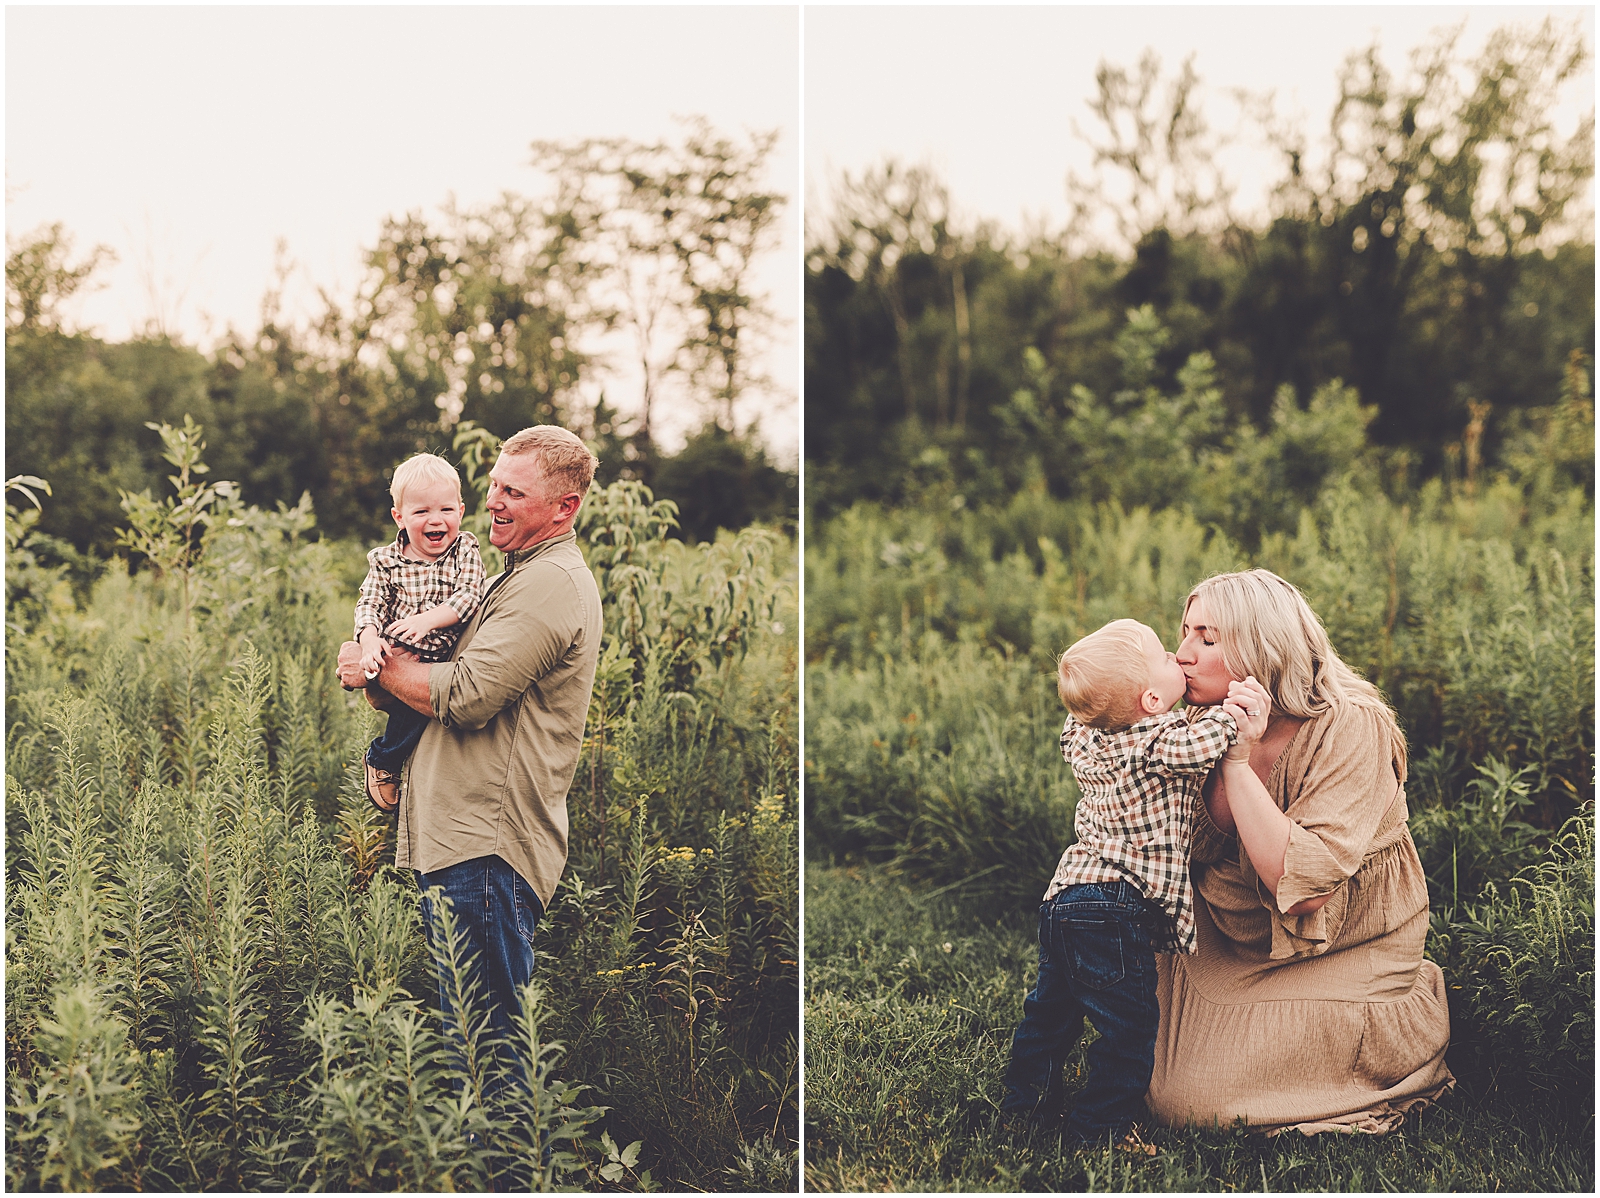 Hickory Creek family session in Mokena for the Metzger family with Kankakee County family photographer Kara Evans Photographer.